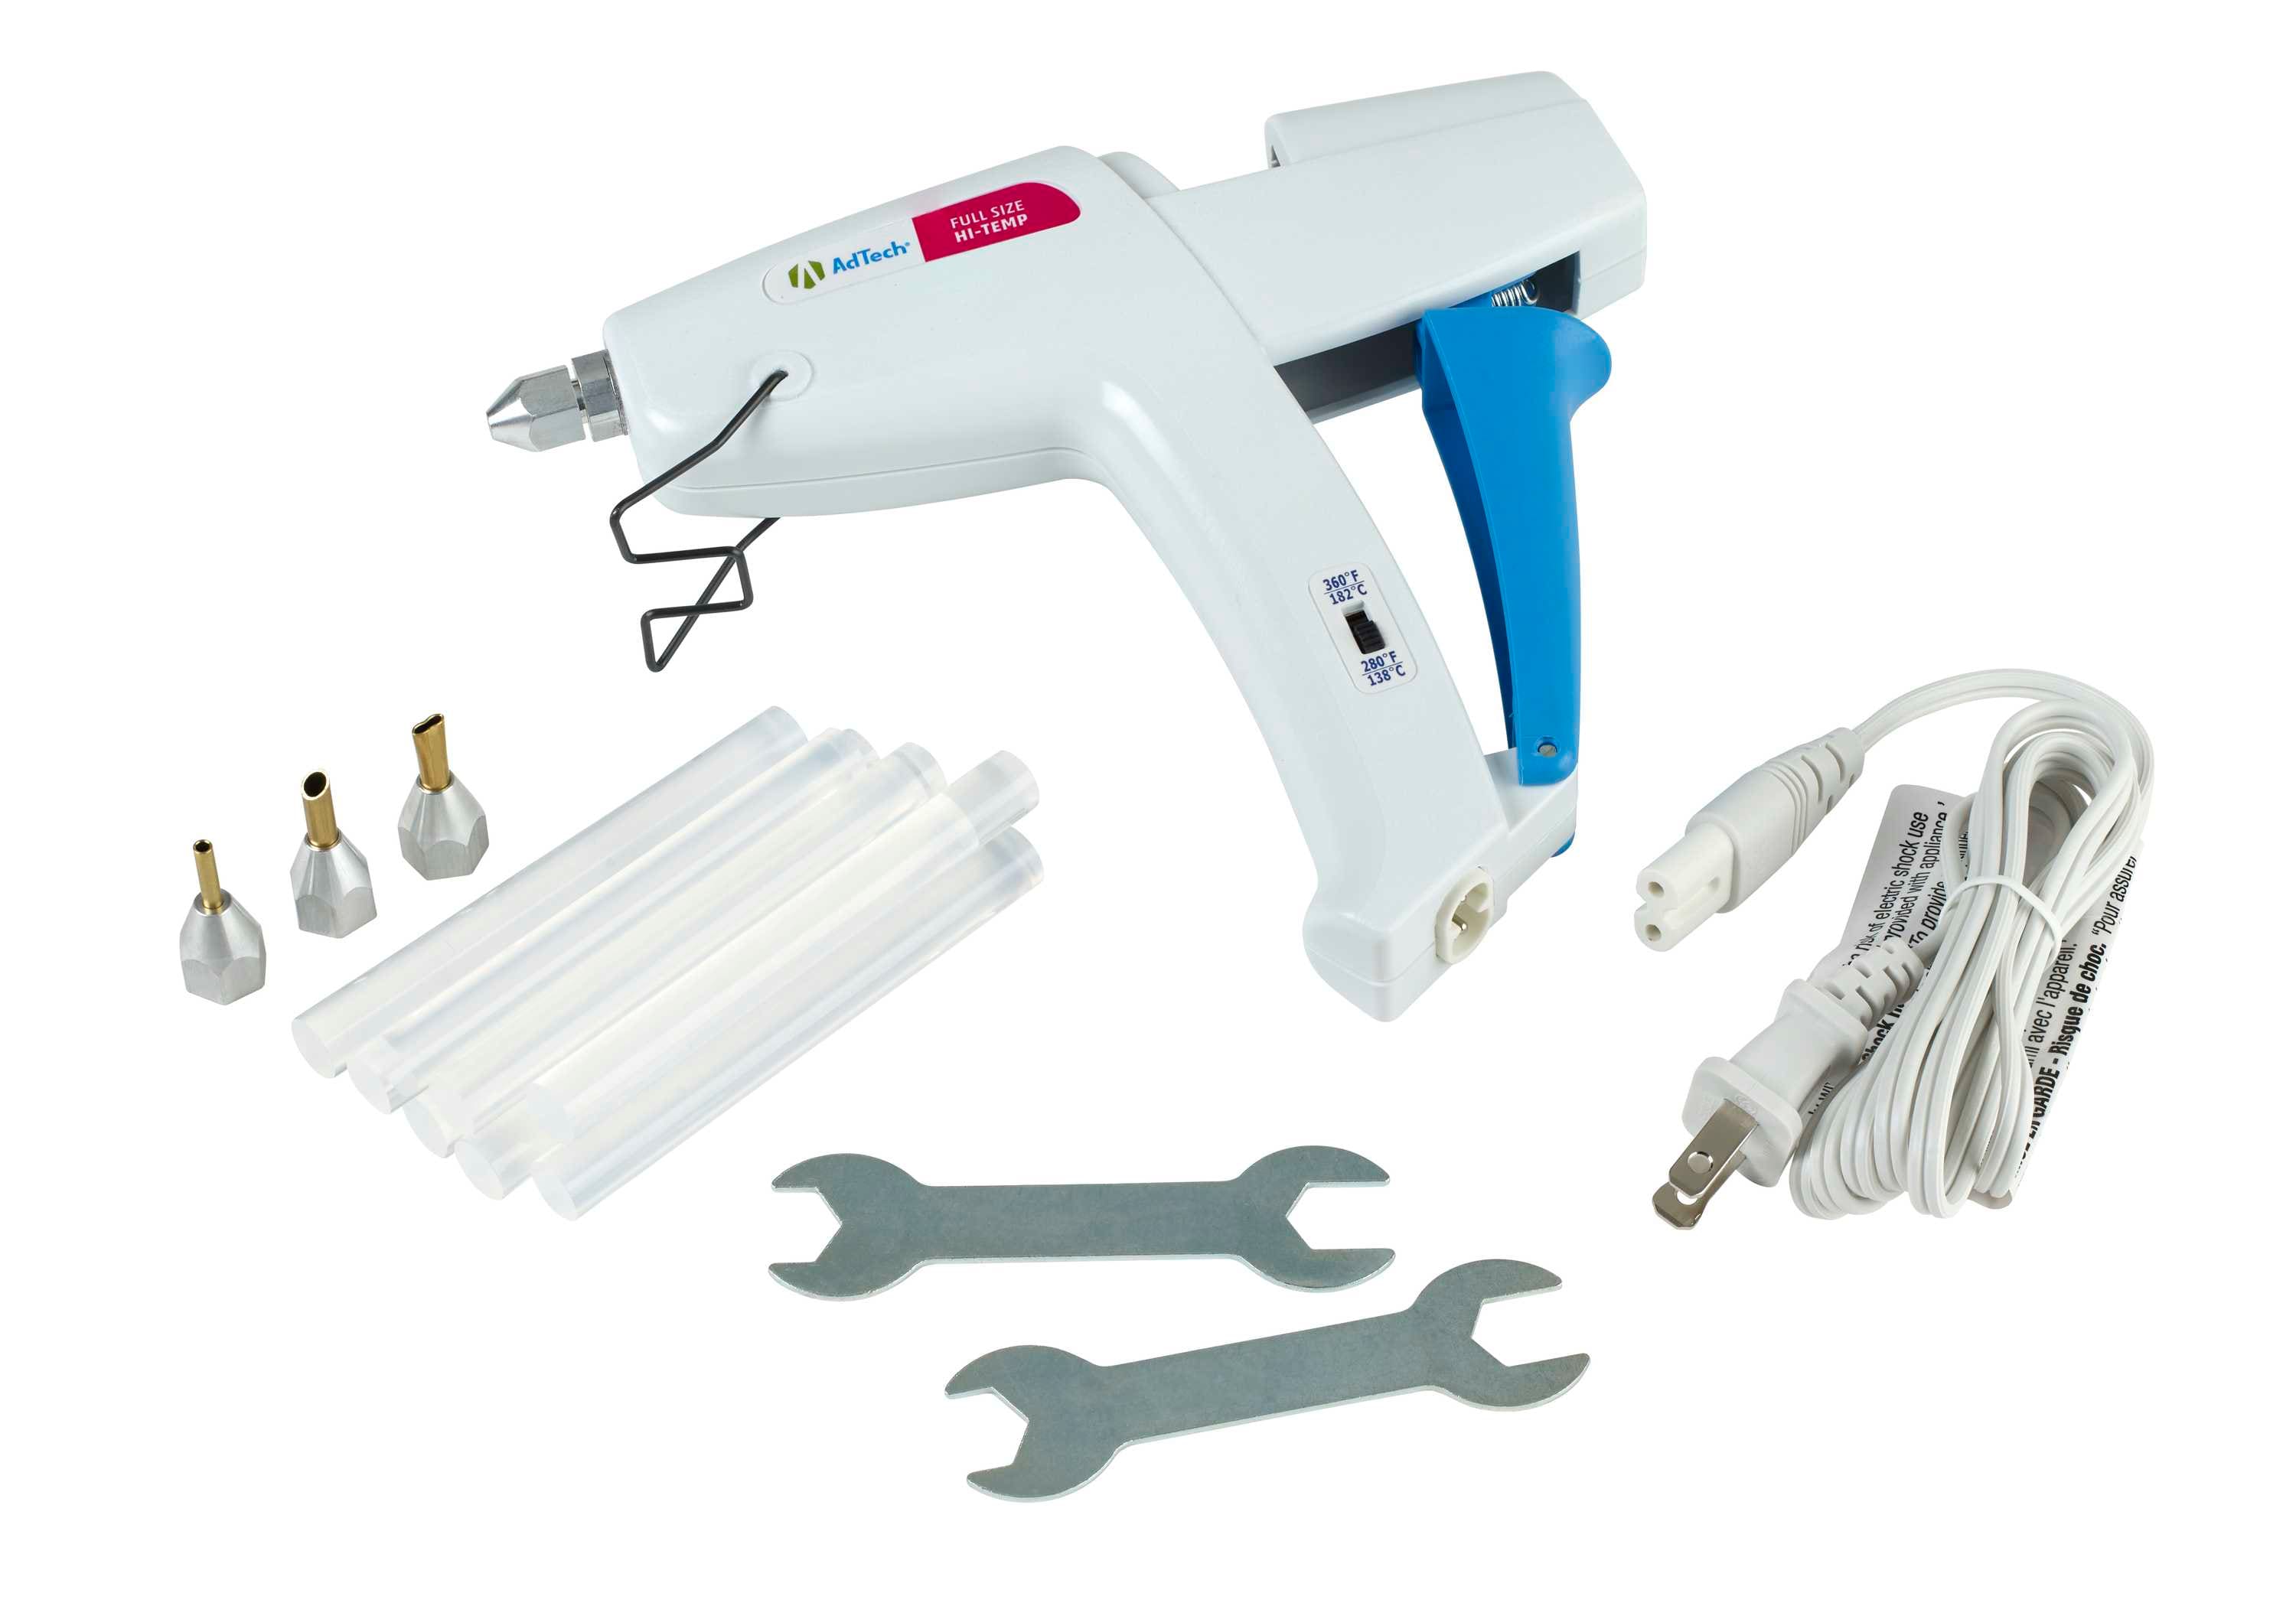 AdTech Ultimate Glue Gun Kit - Dual Temp Cordless Glue Gun with Palm Fed  Trigger - UL Safety Listed in the Glue Guns department at